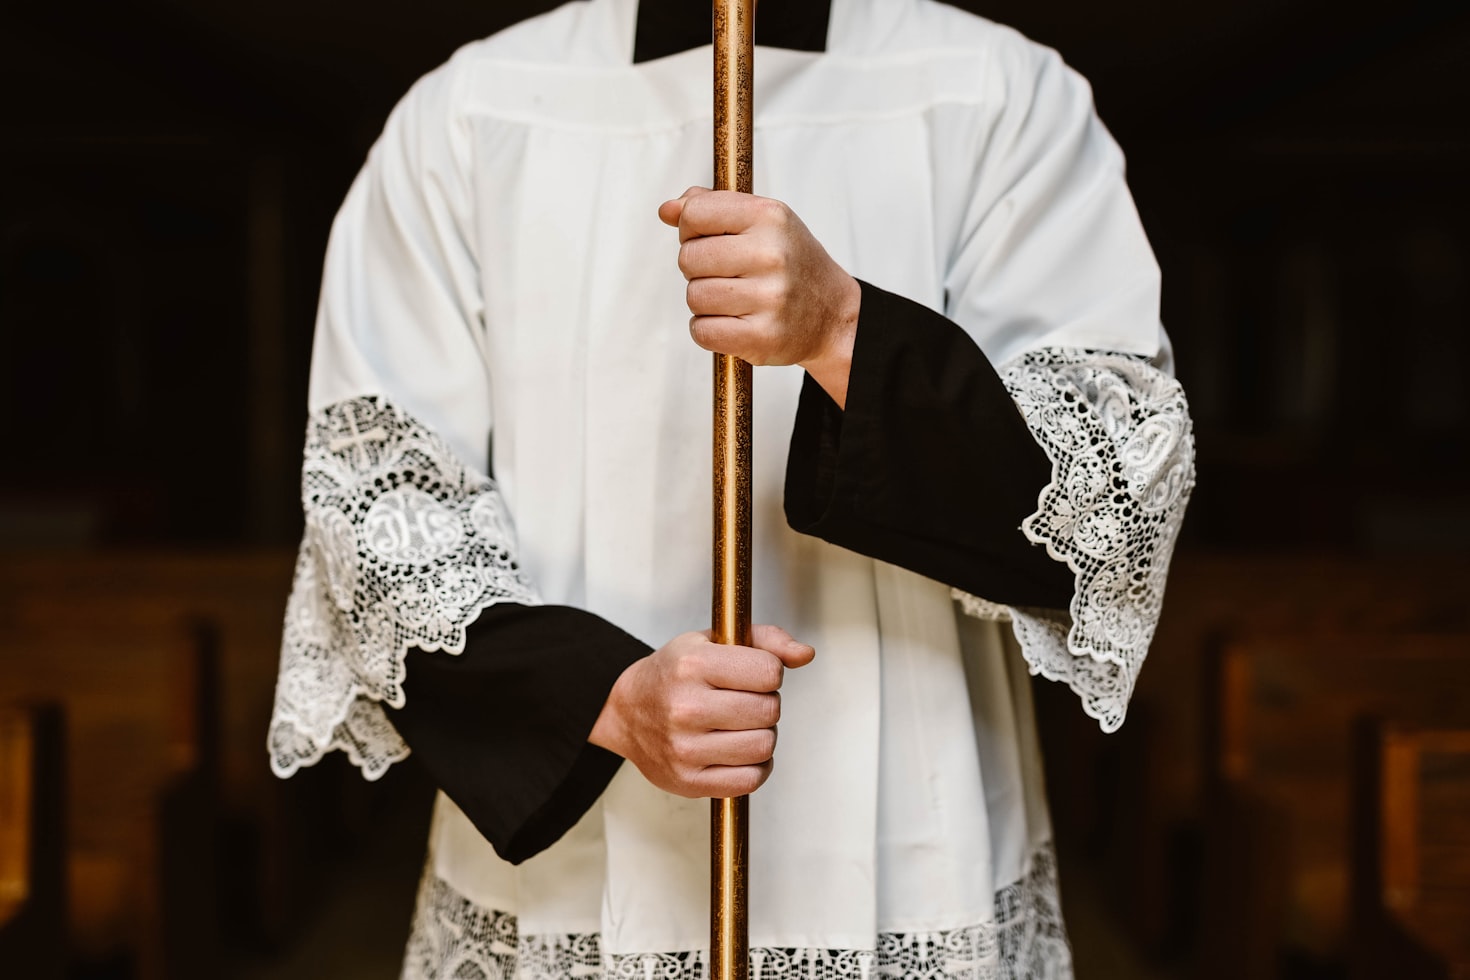 <div><div class="caption">
                  Liturgical Ministers Needed
                  </div><div className="subcaption">
                  Altar servers, lectors, ushers, and eucharistic ministers are all needed. <a href="mailto:info@olphkc.org">Contact the parish office</a> to sign up.
                </div></div>